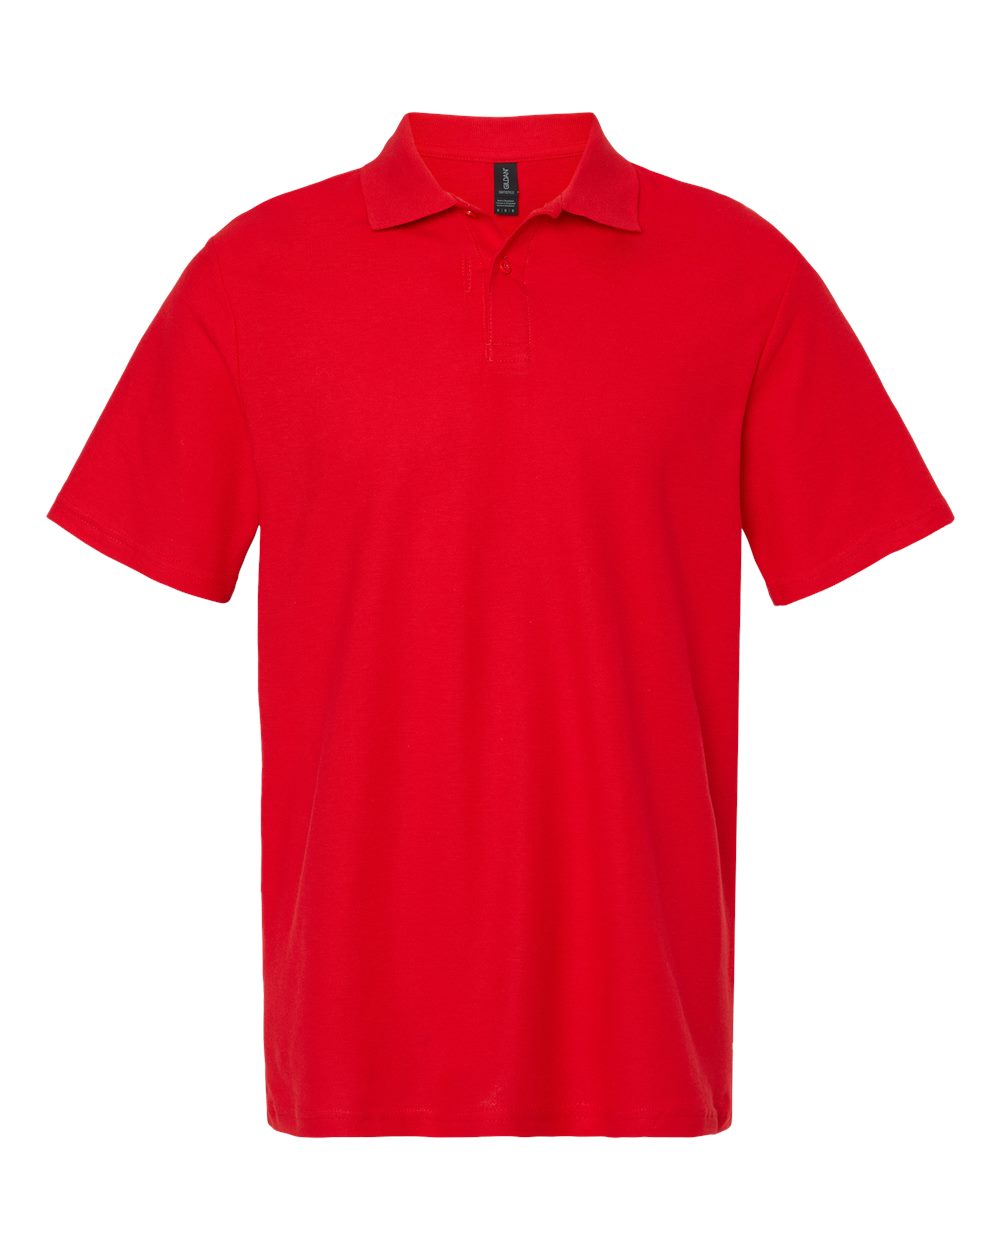 Gildan Softstyle® Adult Pique Polo 64800 #color_Red